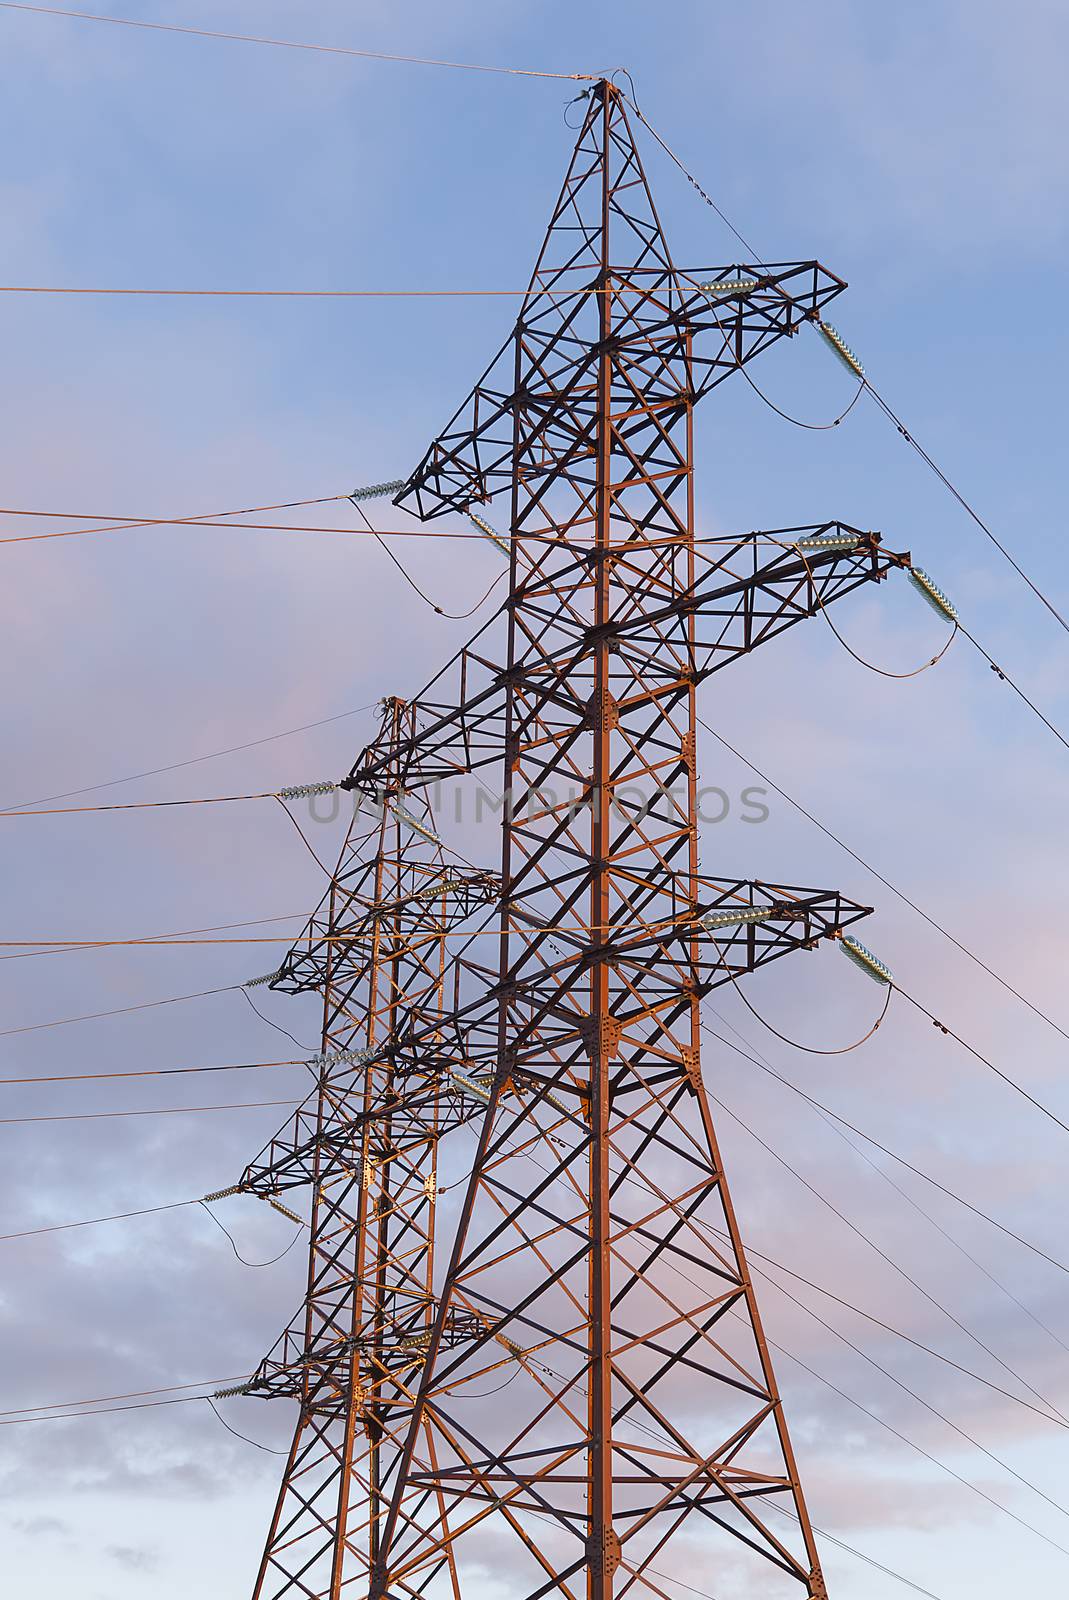 A high-voltage electricity tower. A High-voltage power transmission tower. Power engineering